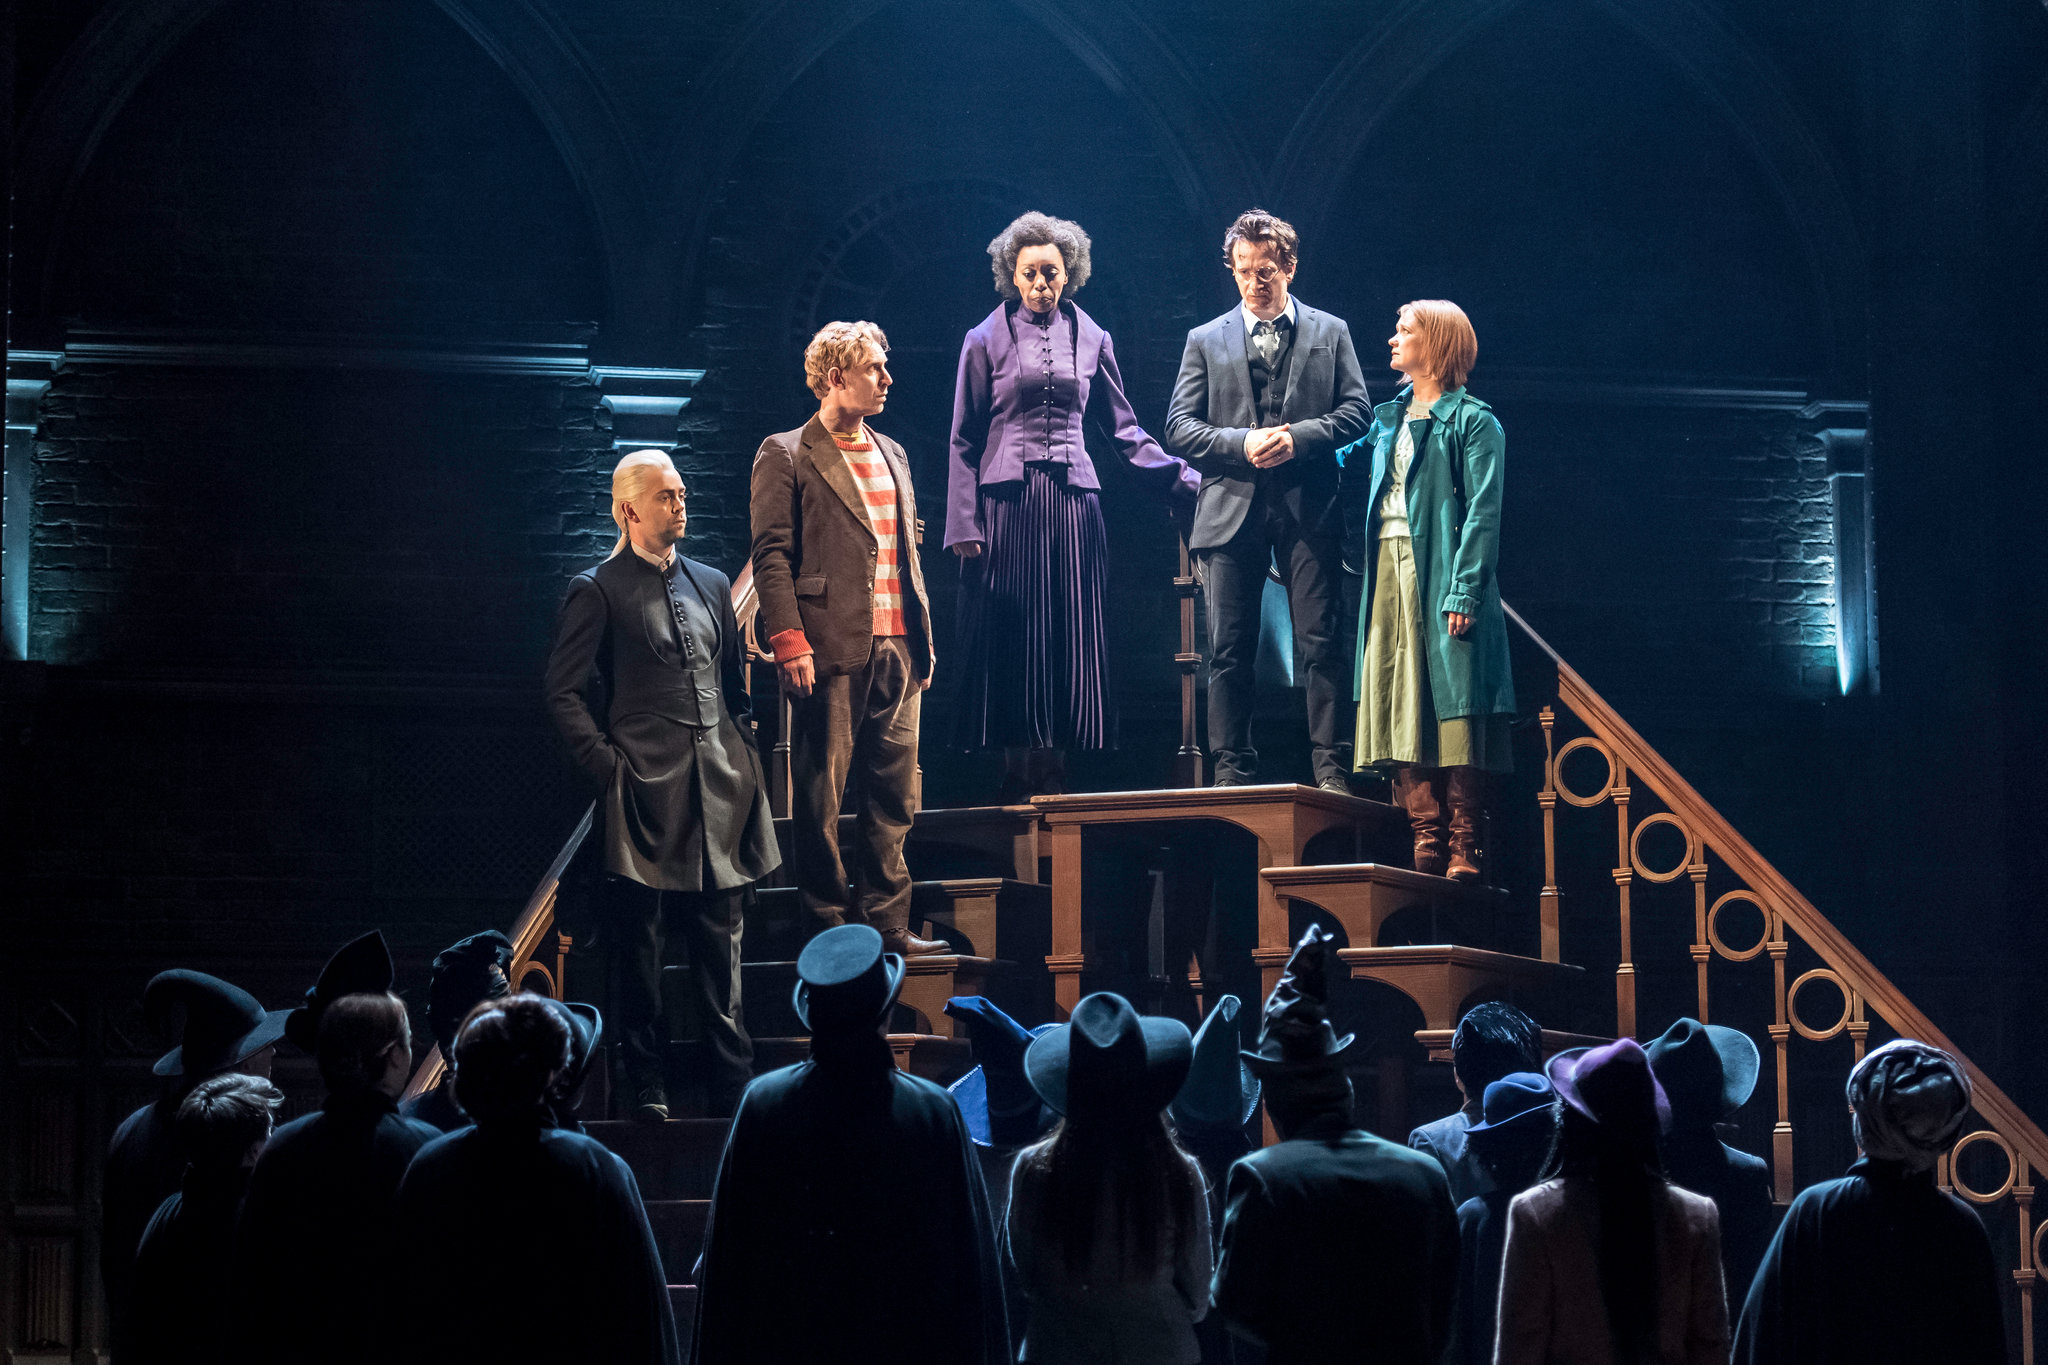 Harry Potter and The Cursed Child - Part 1 & 2 (10/15 7:30PM & 10/16 7:30PM) at Lyric Theatre